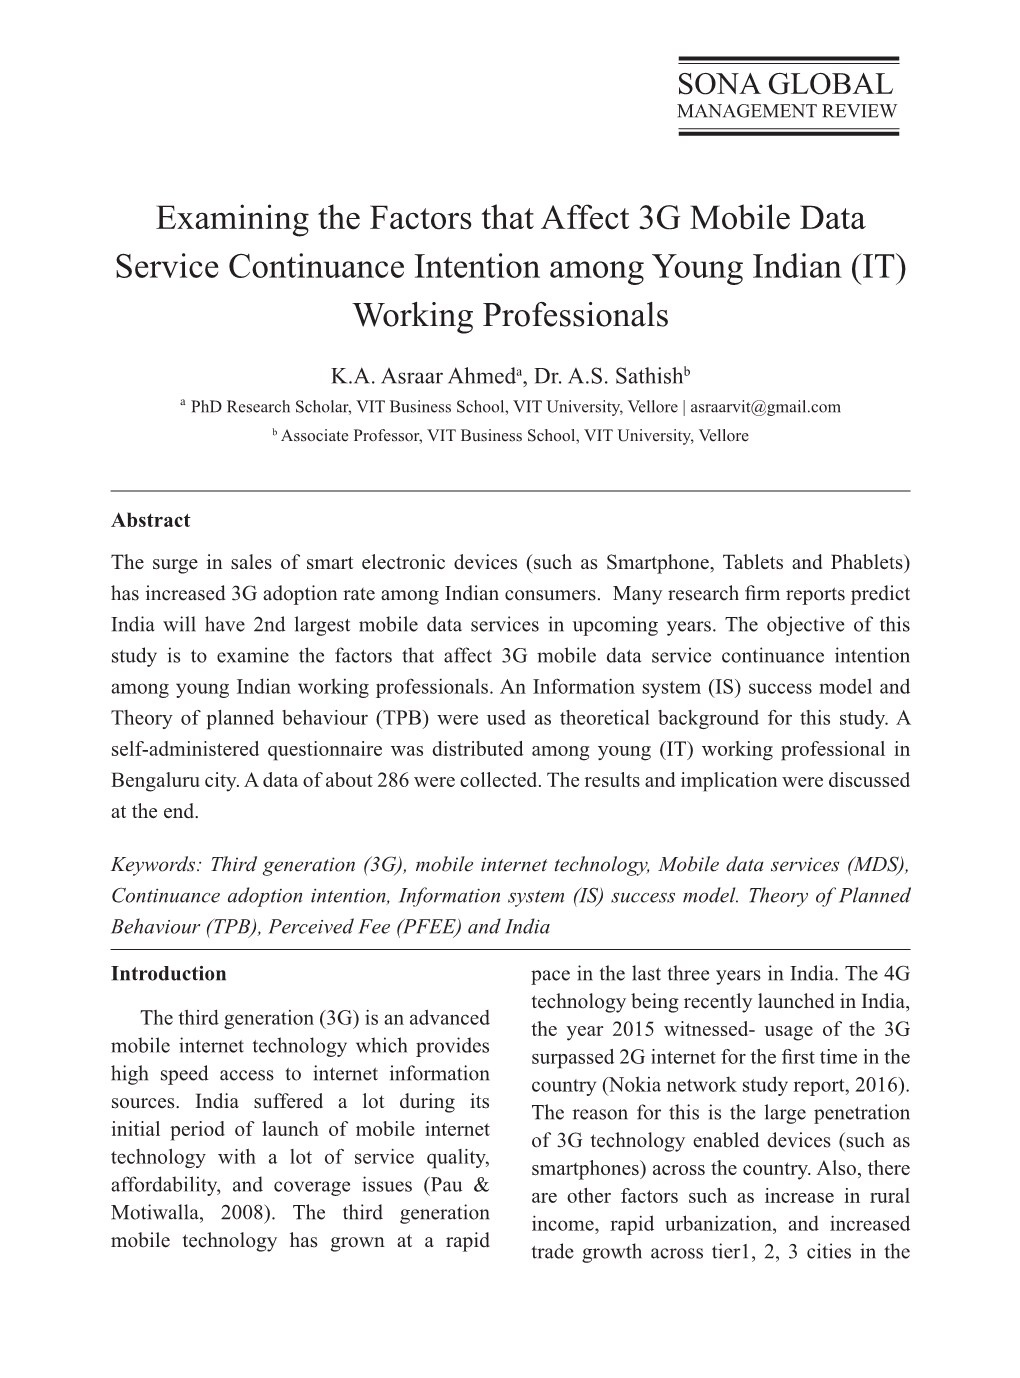 Examining the Factors That Affect 3G Mobile Data Service Continuance Intention Among Young Indian (IT) Working Professionals